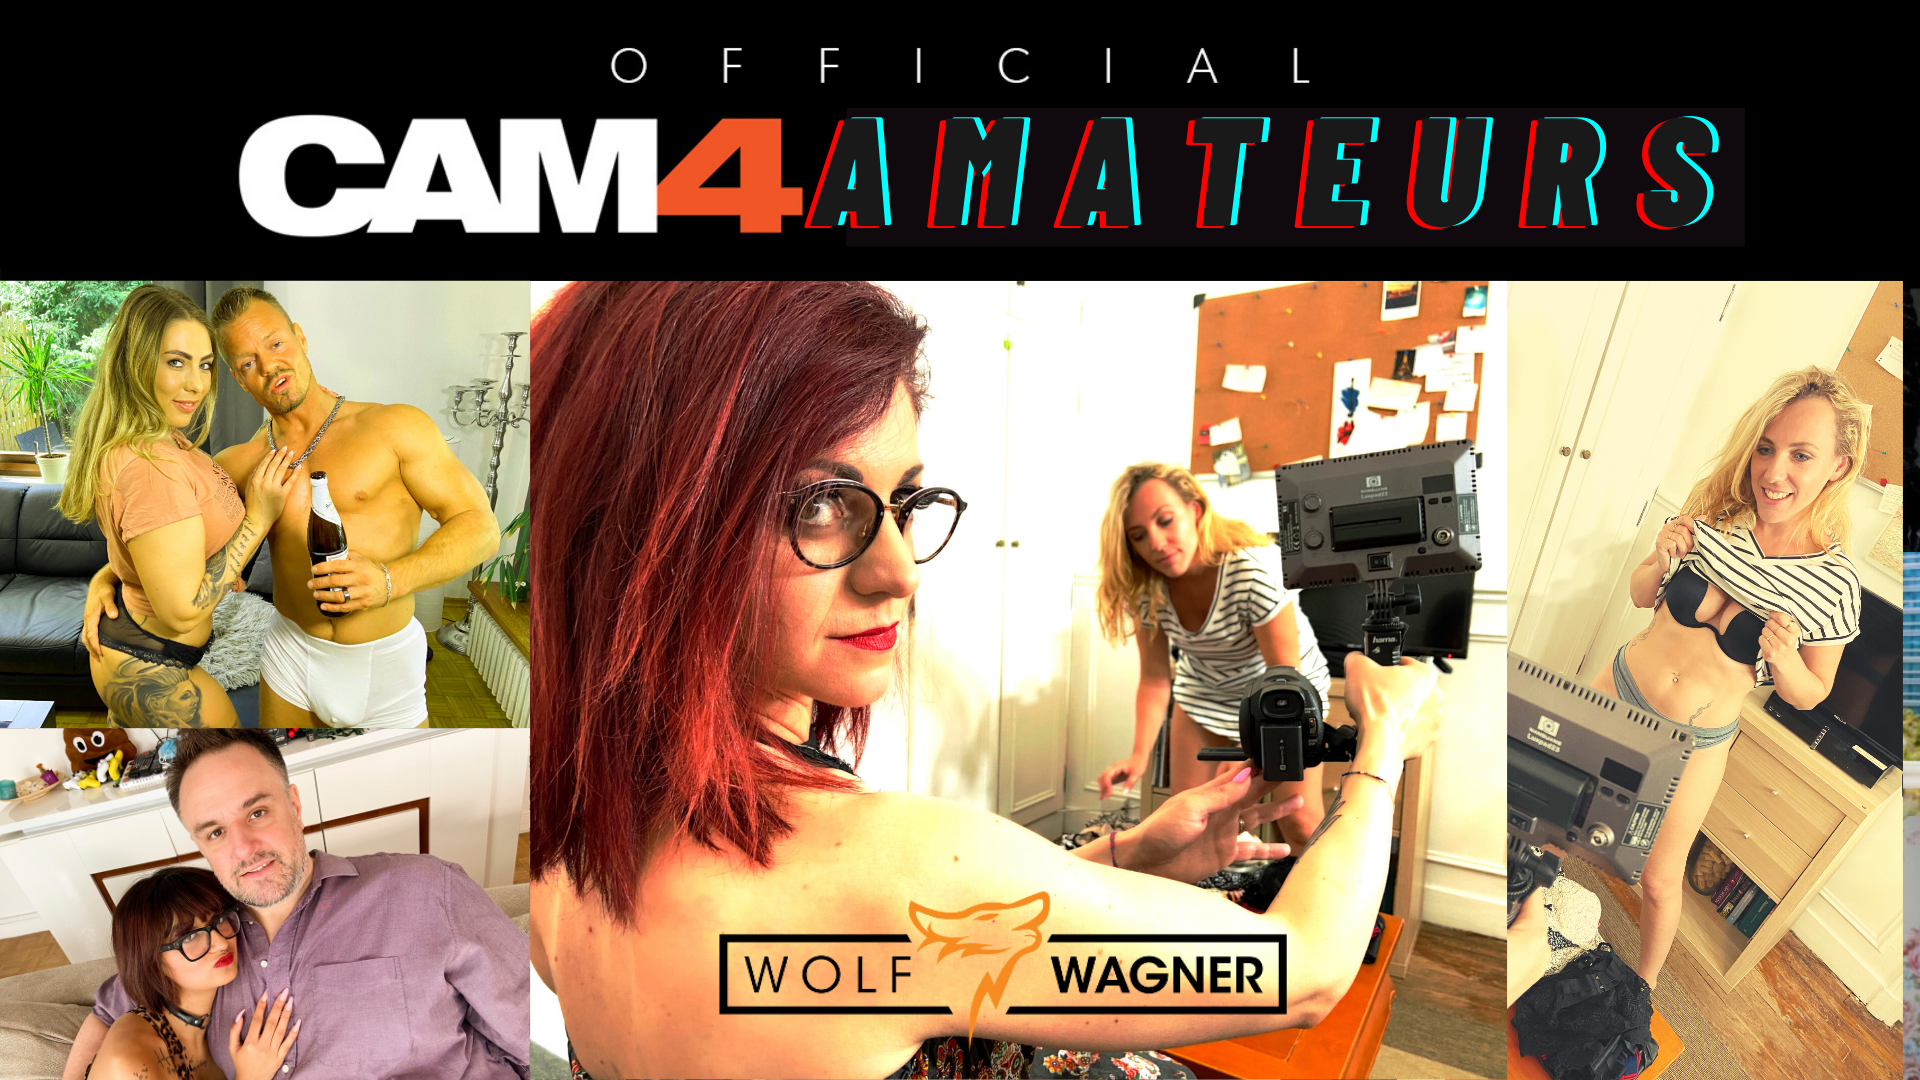 CAM4 & Wolf Wagner Network Launch New Adult Series ‘CAM4 AMATEURS’